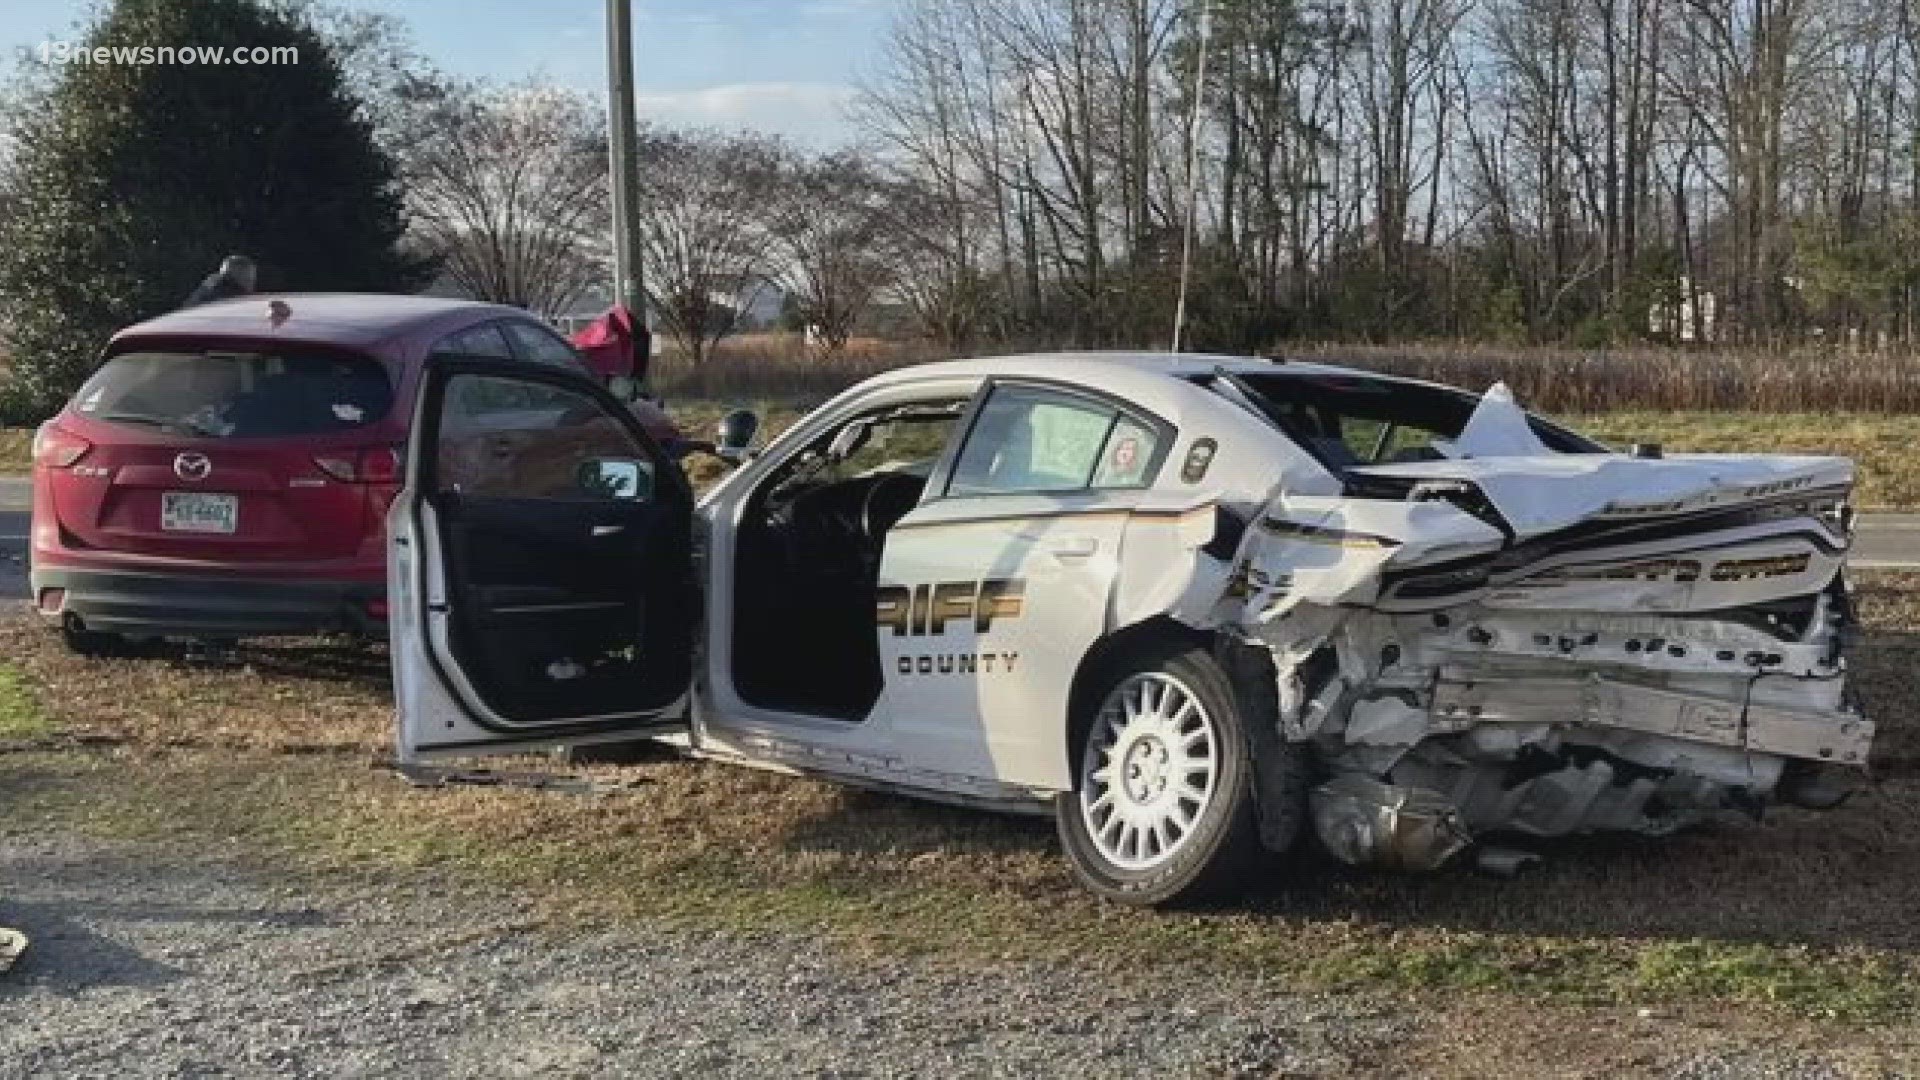 The deputy was running radar when another vehicle rammed into his patrol car, the Sheriff's Office says.